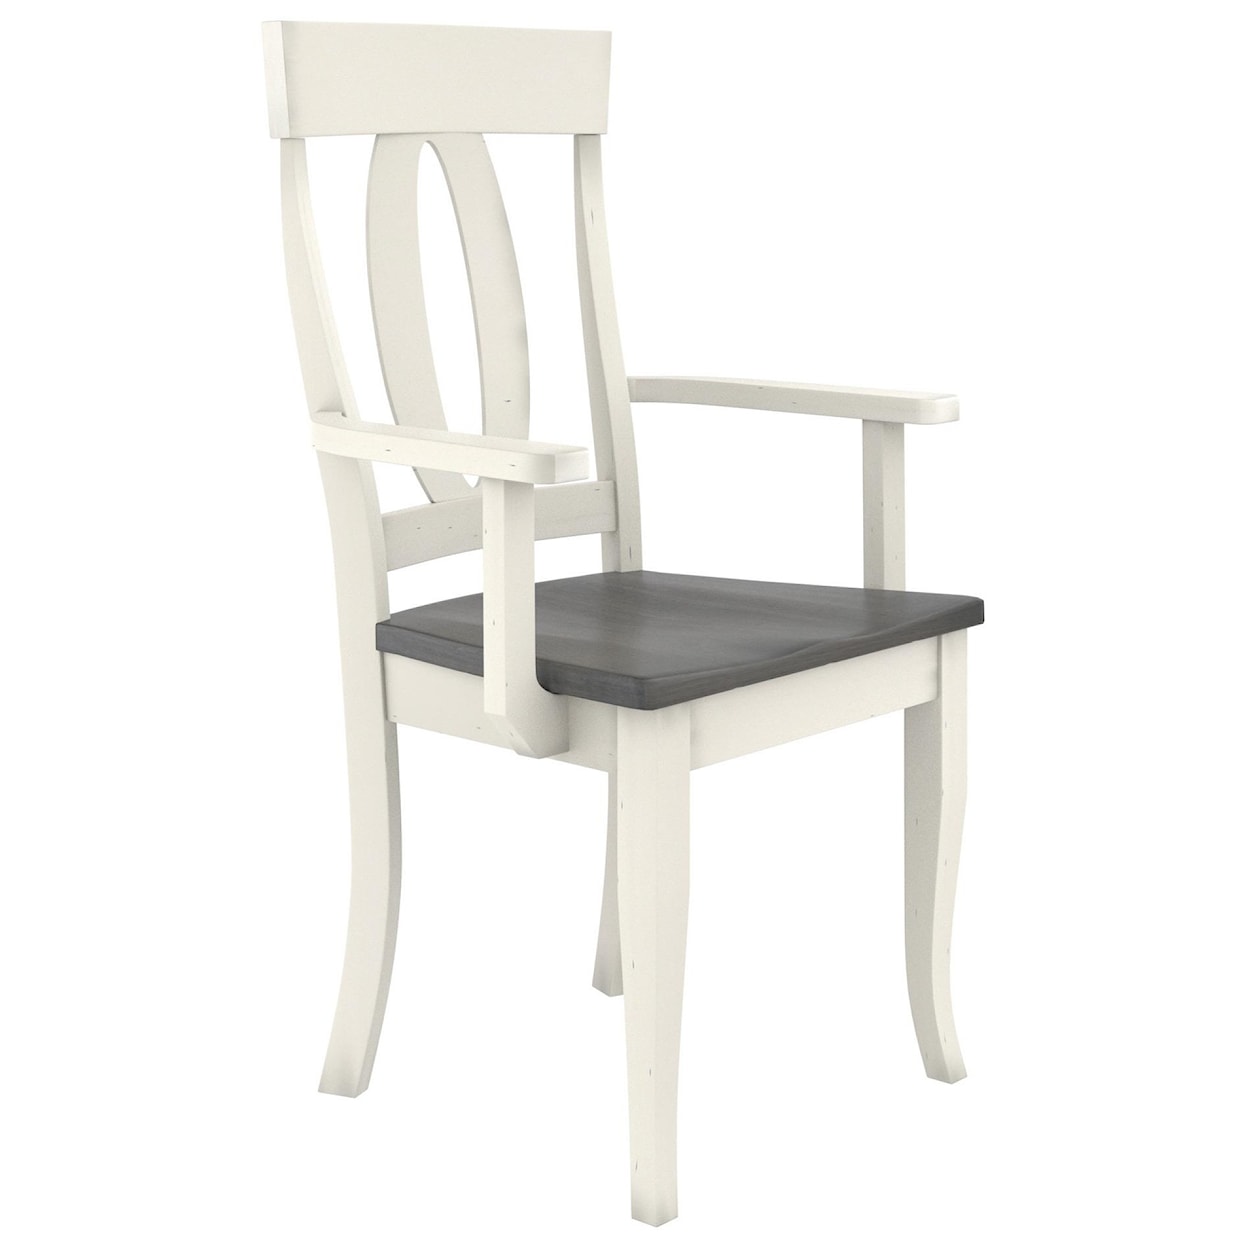 Wengerd Wood Products Solo Arm Chair